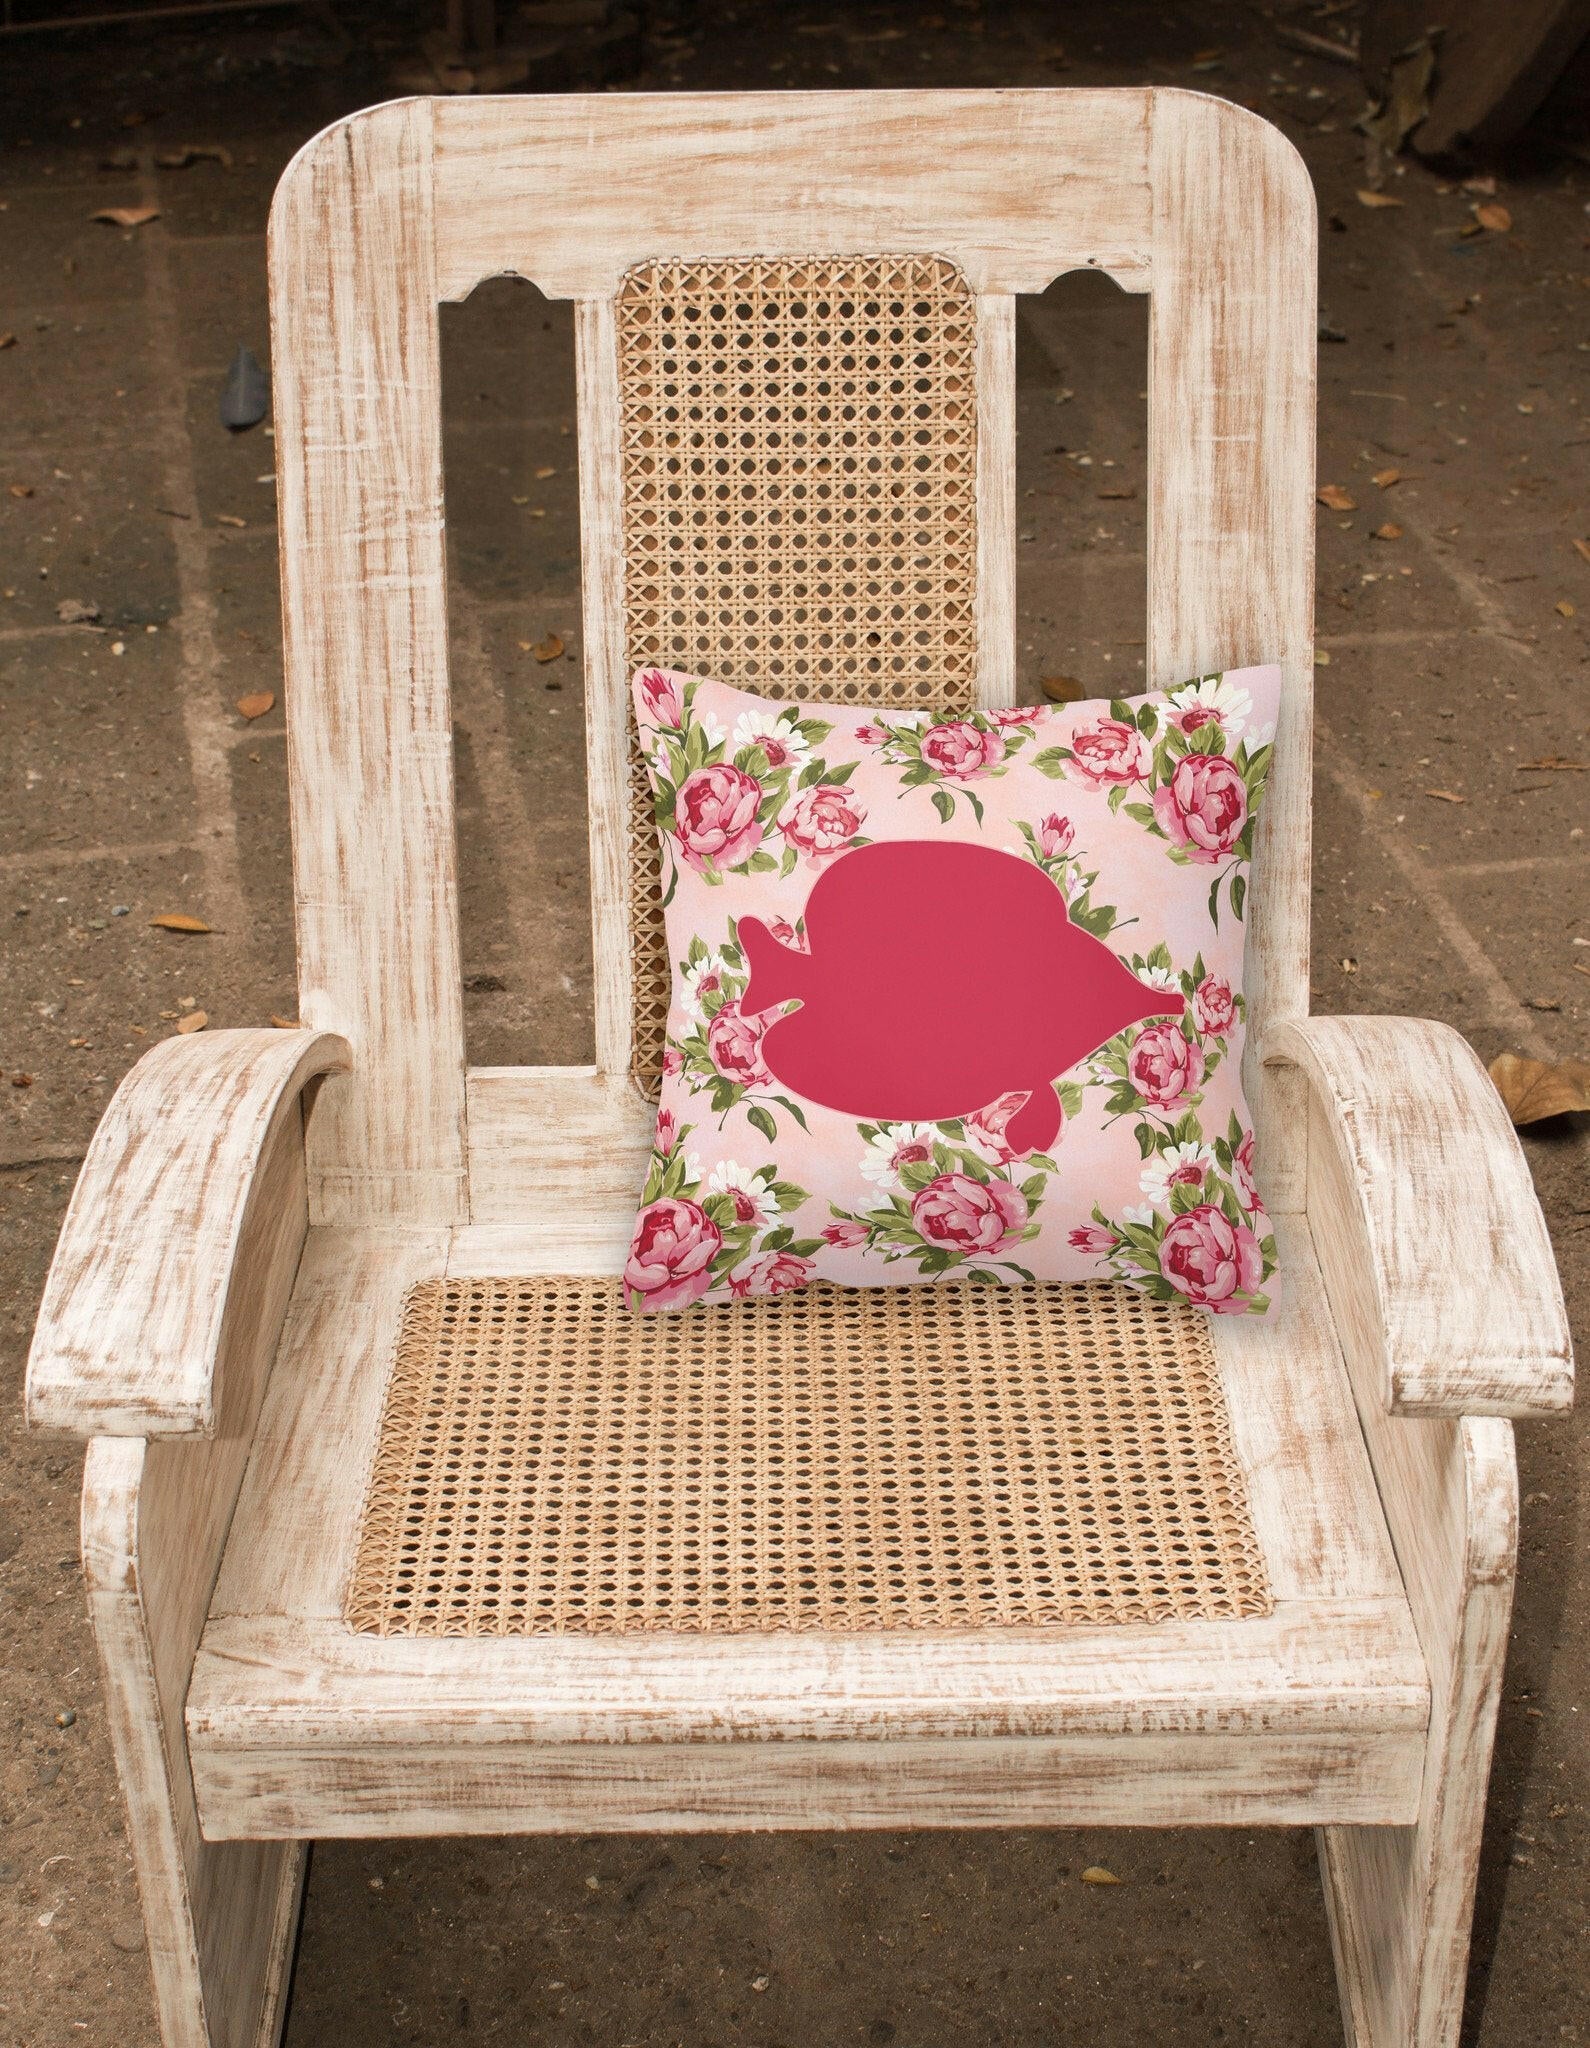 Fish - Tang Fish Shabby Chic Pink Roses  Fabric Decorative Pillow BB1023-RS-PK-PW1414 - the-store.com